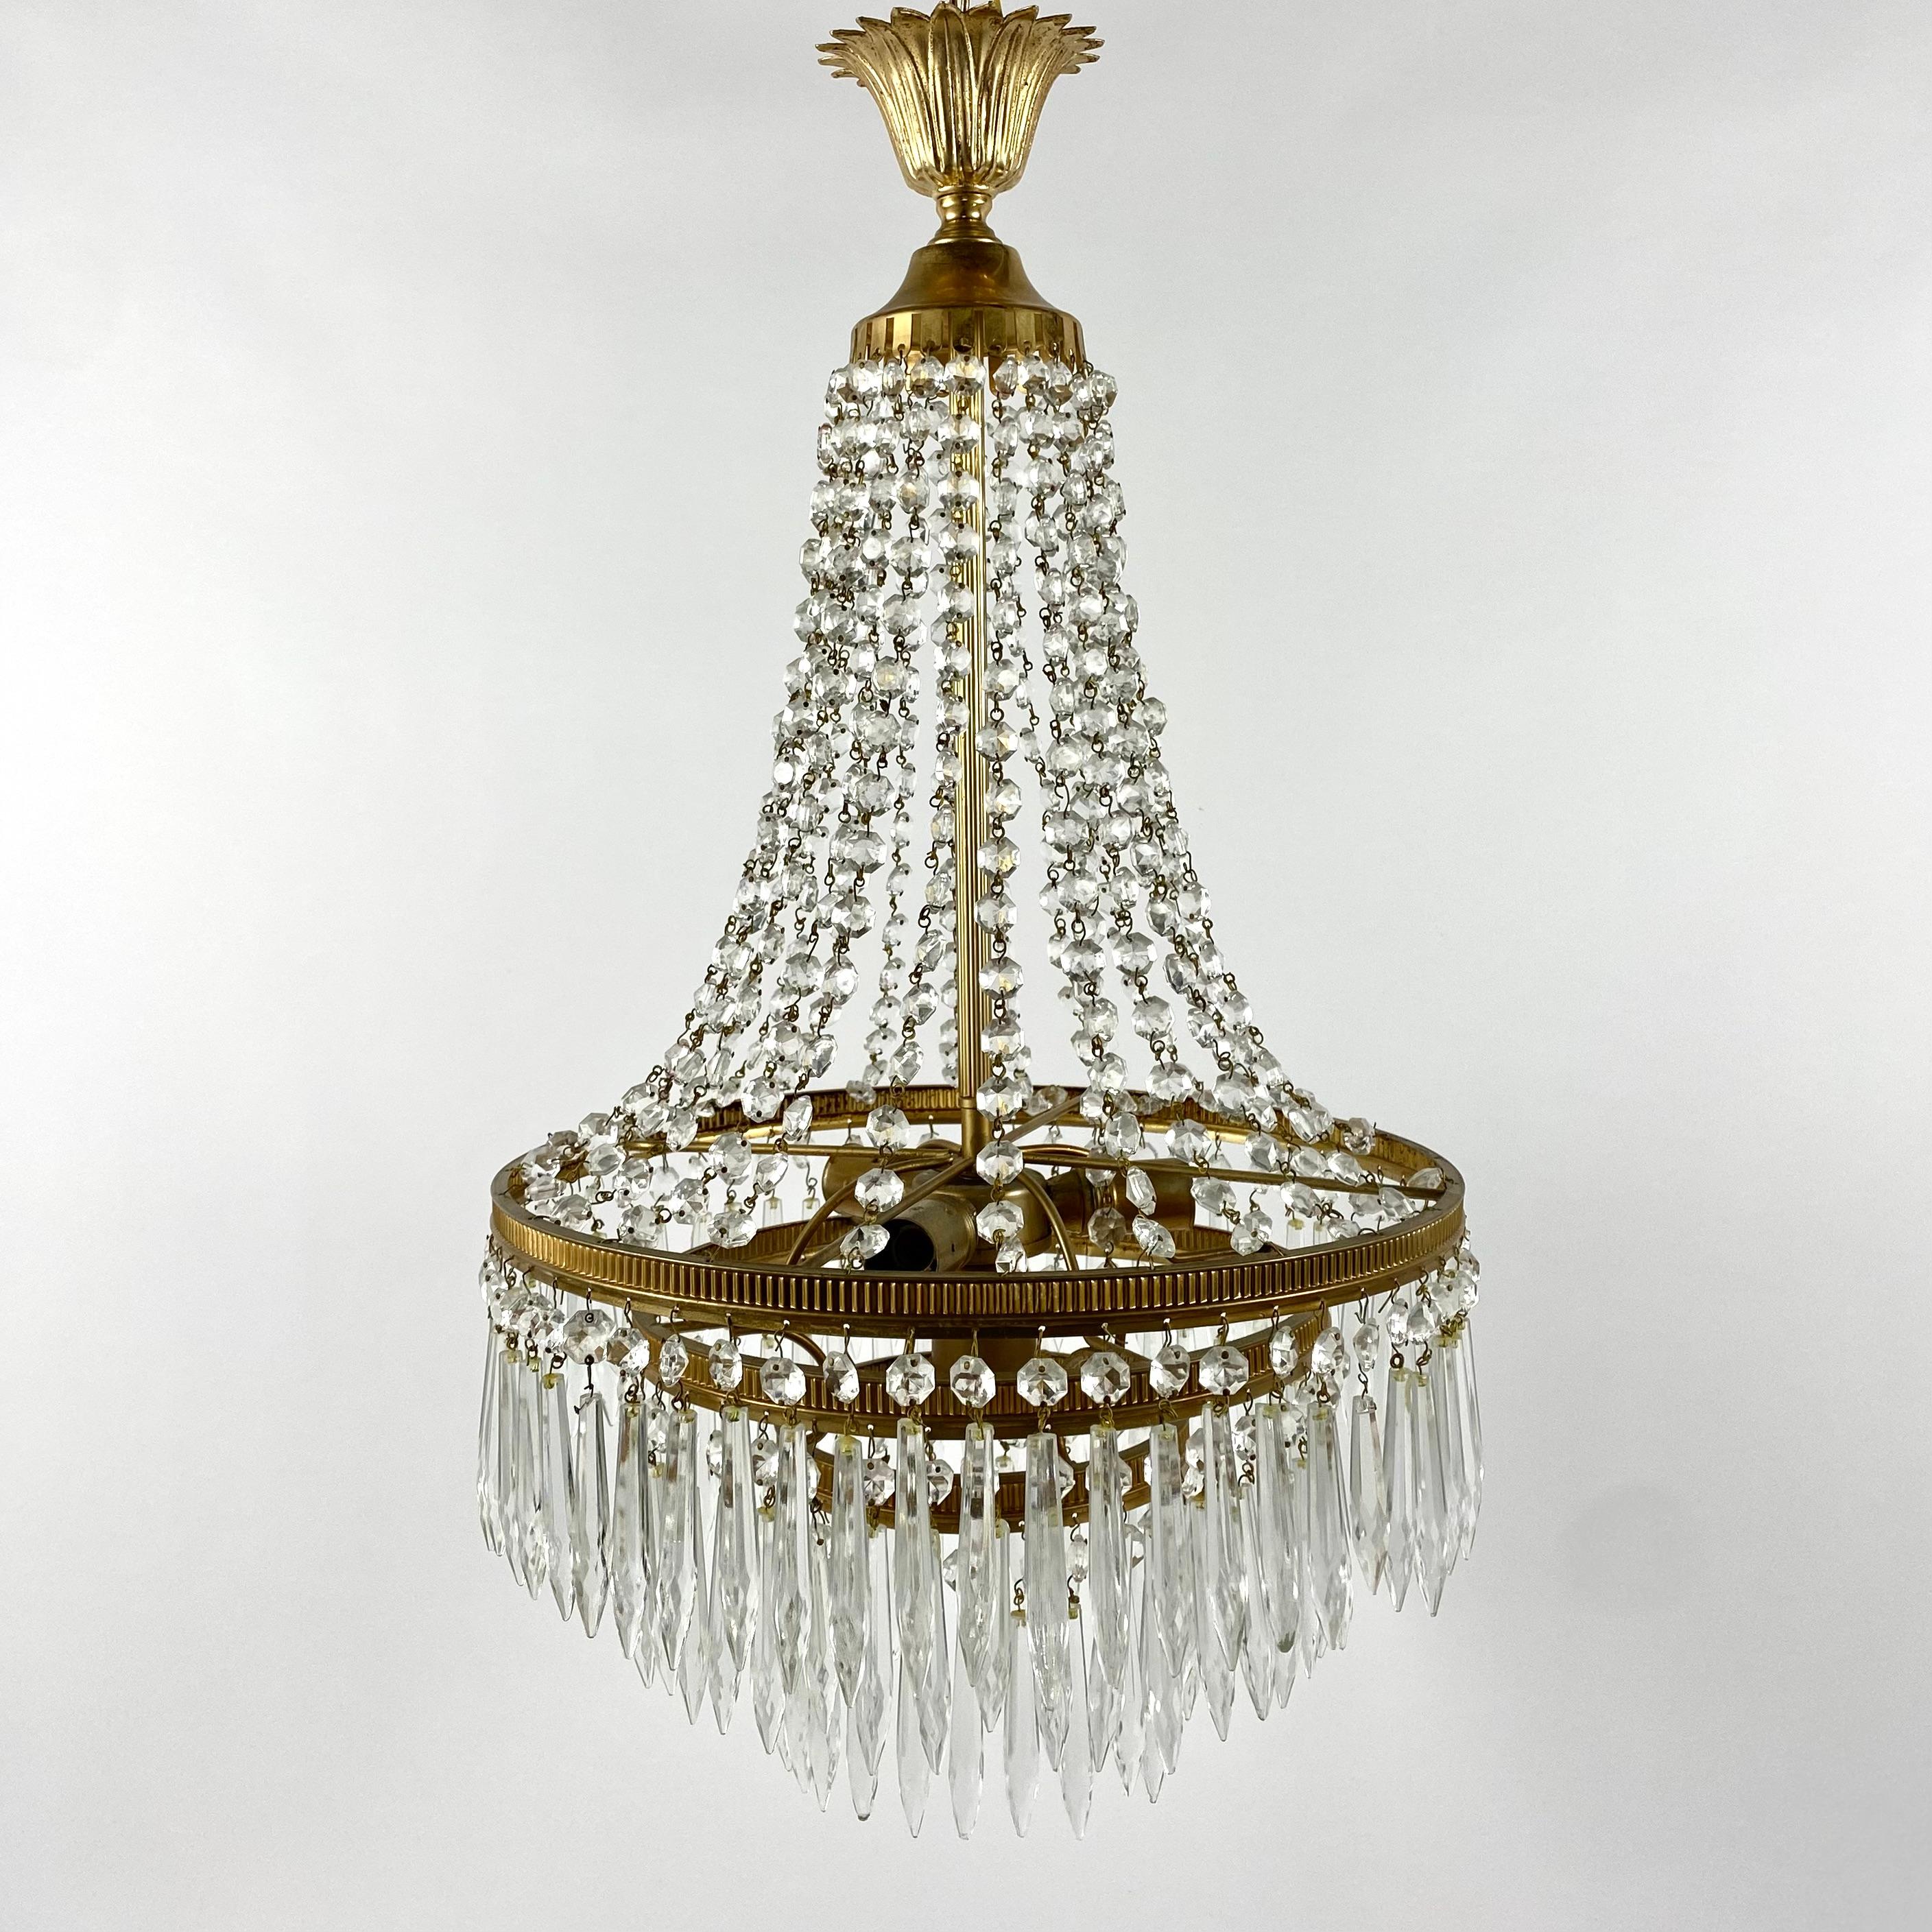 Adorable Crystal Chandelier with Brass Frame, for 3 light points.

Richly Decorated chandelier with decorative elements and pendants made of transparent crystal. 

One of the main advantages of this chandelier is its design. Brass details adorned